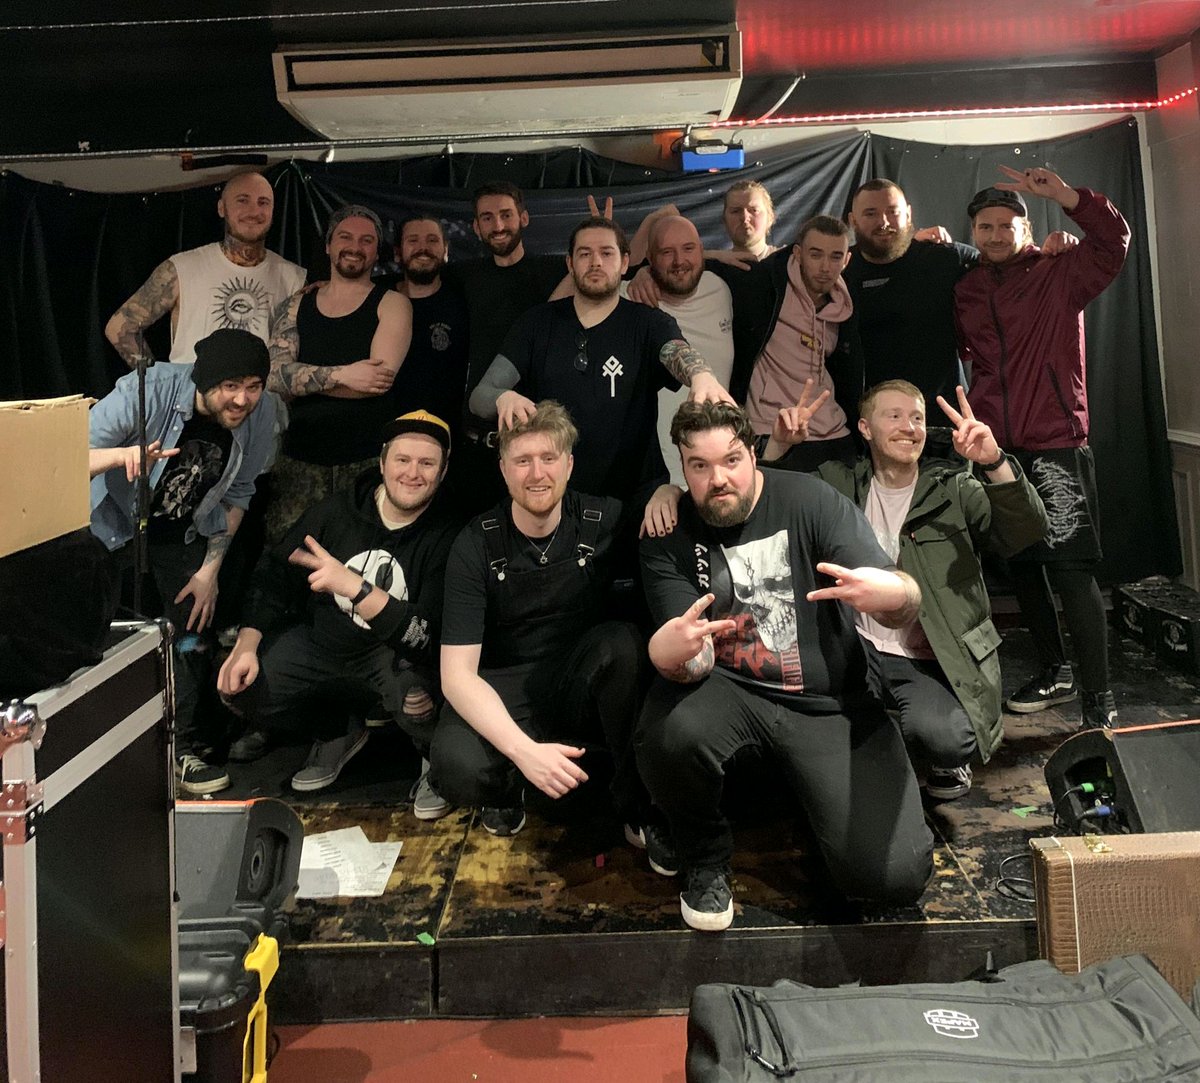 DAY 1 - NEWCASTLE Last night was phenomenal!! We had a blast. London, you're up next! Can you top it? Big up @NegativesOfficial @InTheseWallsOfficial @Drenched.band